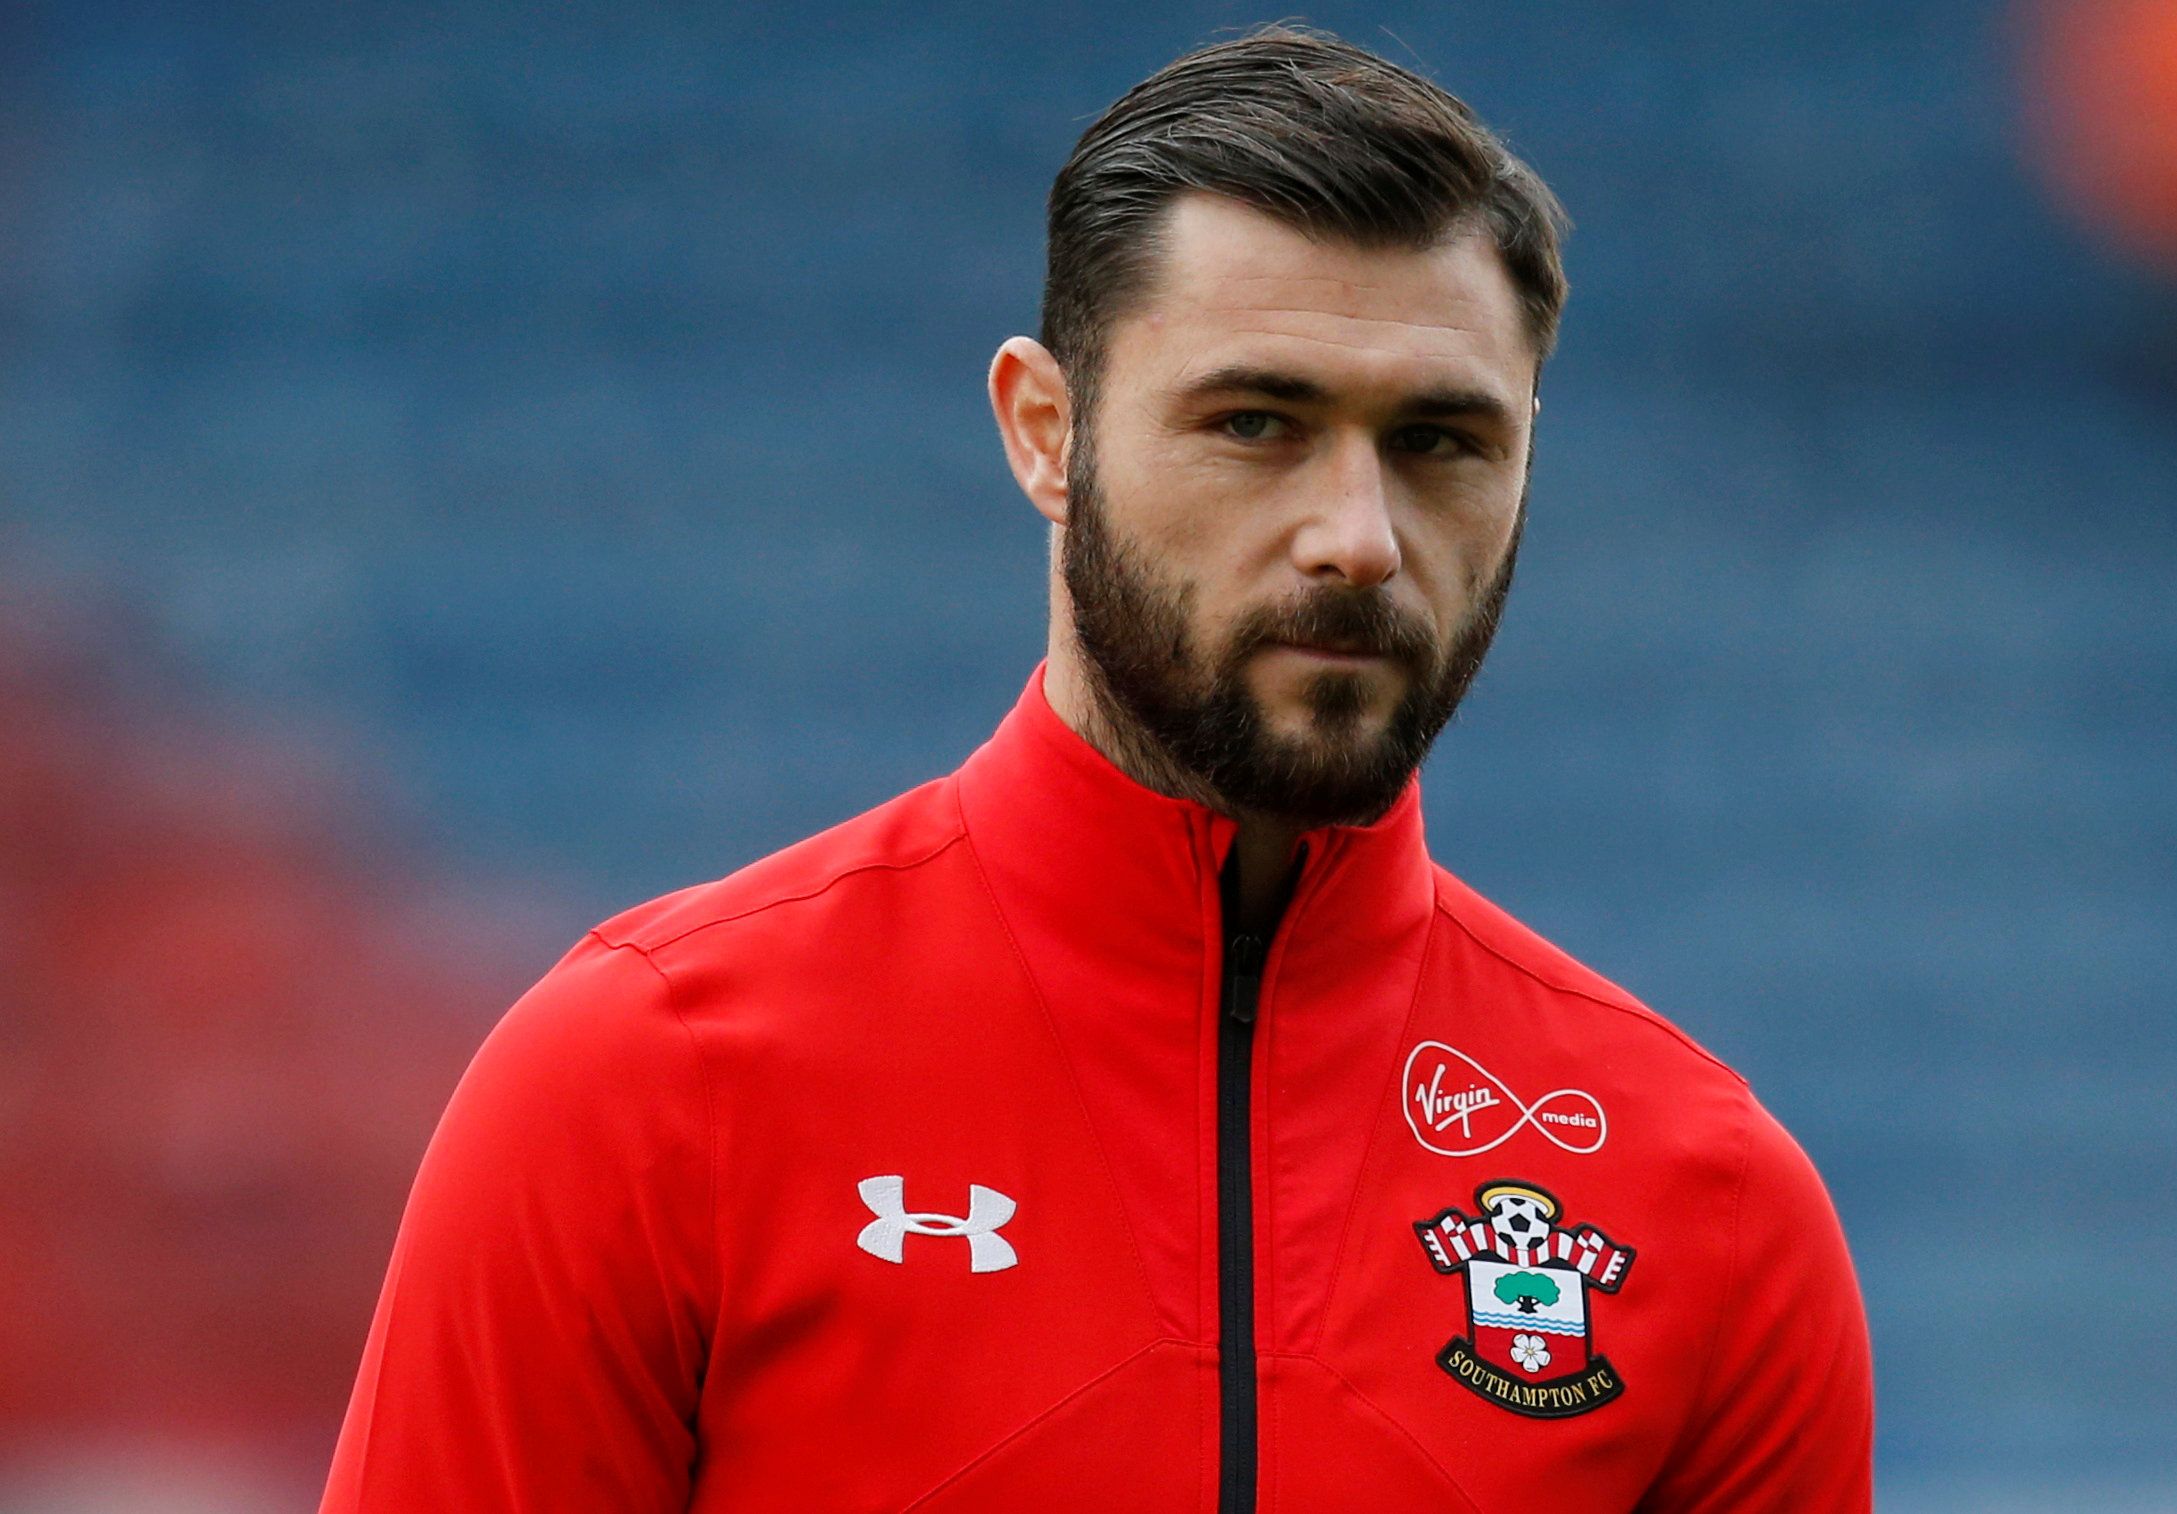 Soccer Football - Premier League - Huddersfield Town v Southampton - John Smith's Stadium, Huddersfield, Britain - December 22, 2018  Southampton's Charlie Austin before the match  Action Images via Reuters/Ed Sykes  EDITORIAL USE ONLY. No use with unauthorized audio, video, data, fixture lists, club/league logos or 